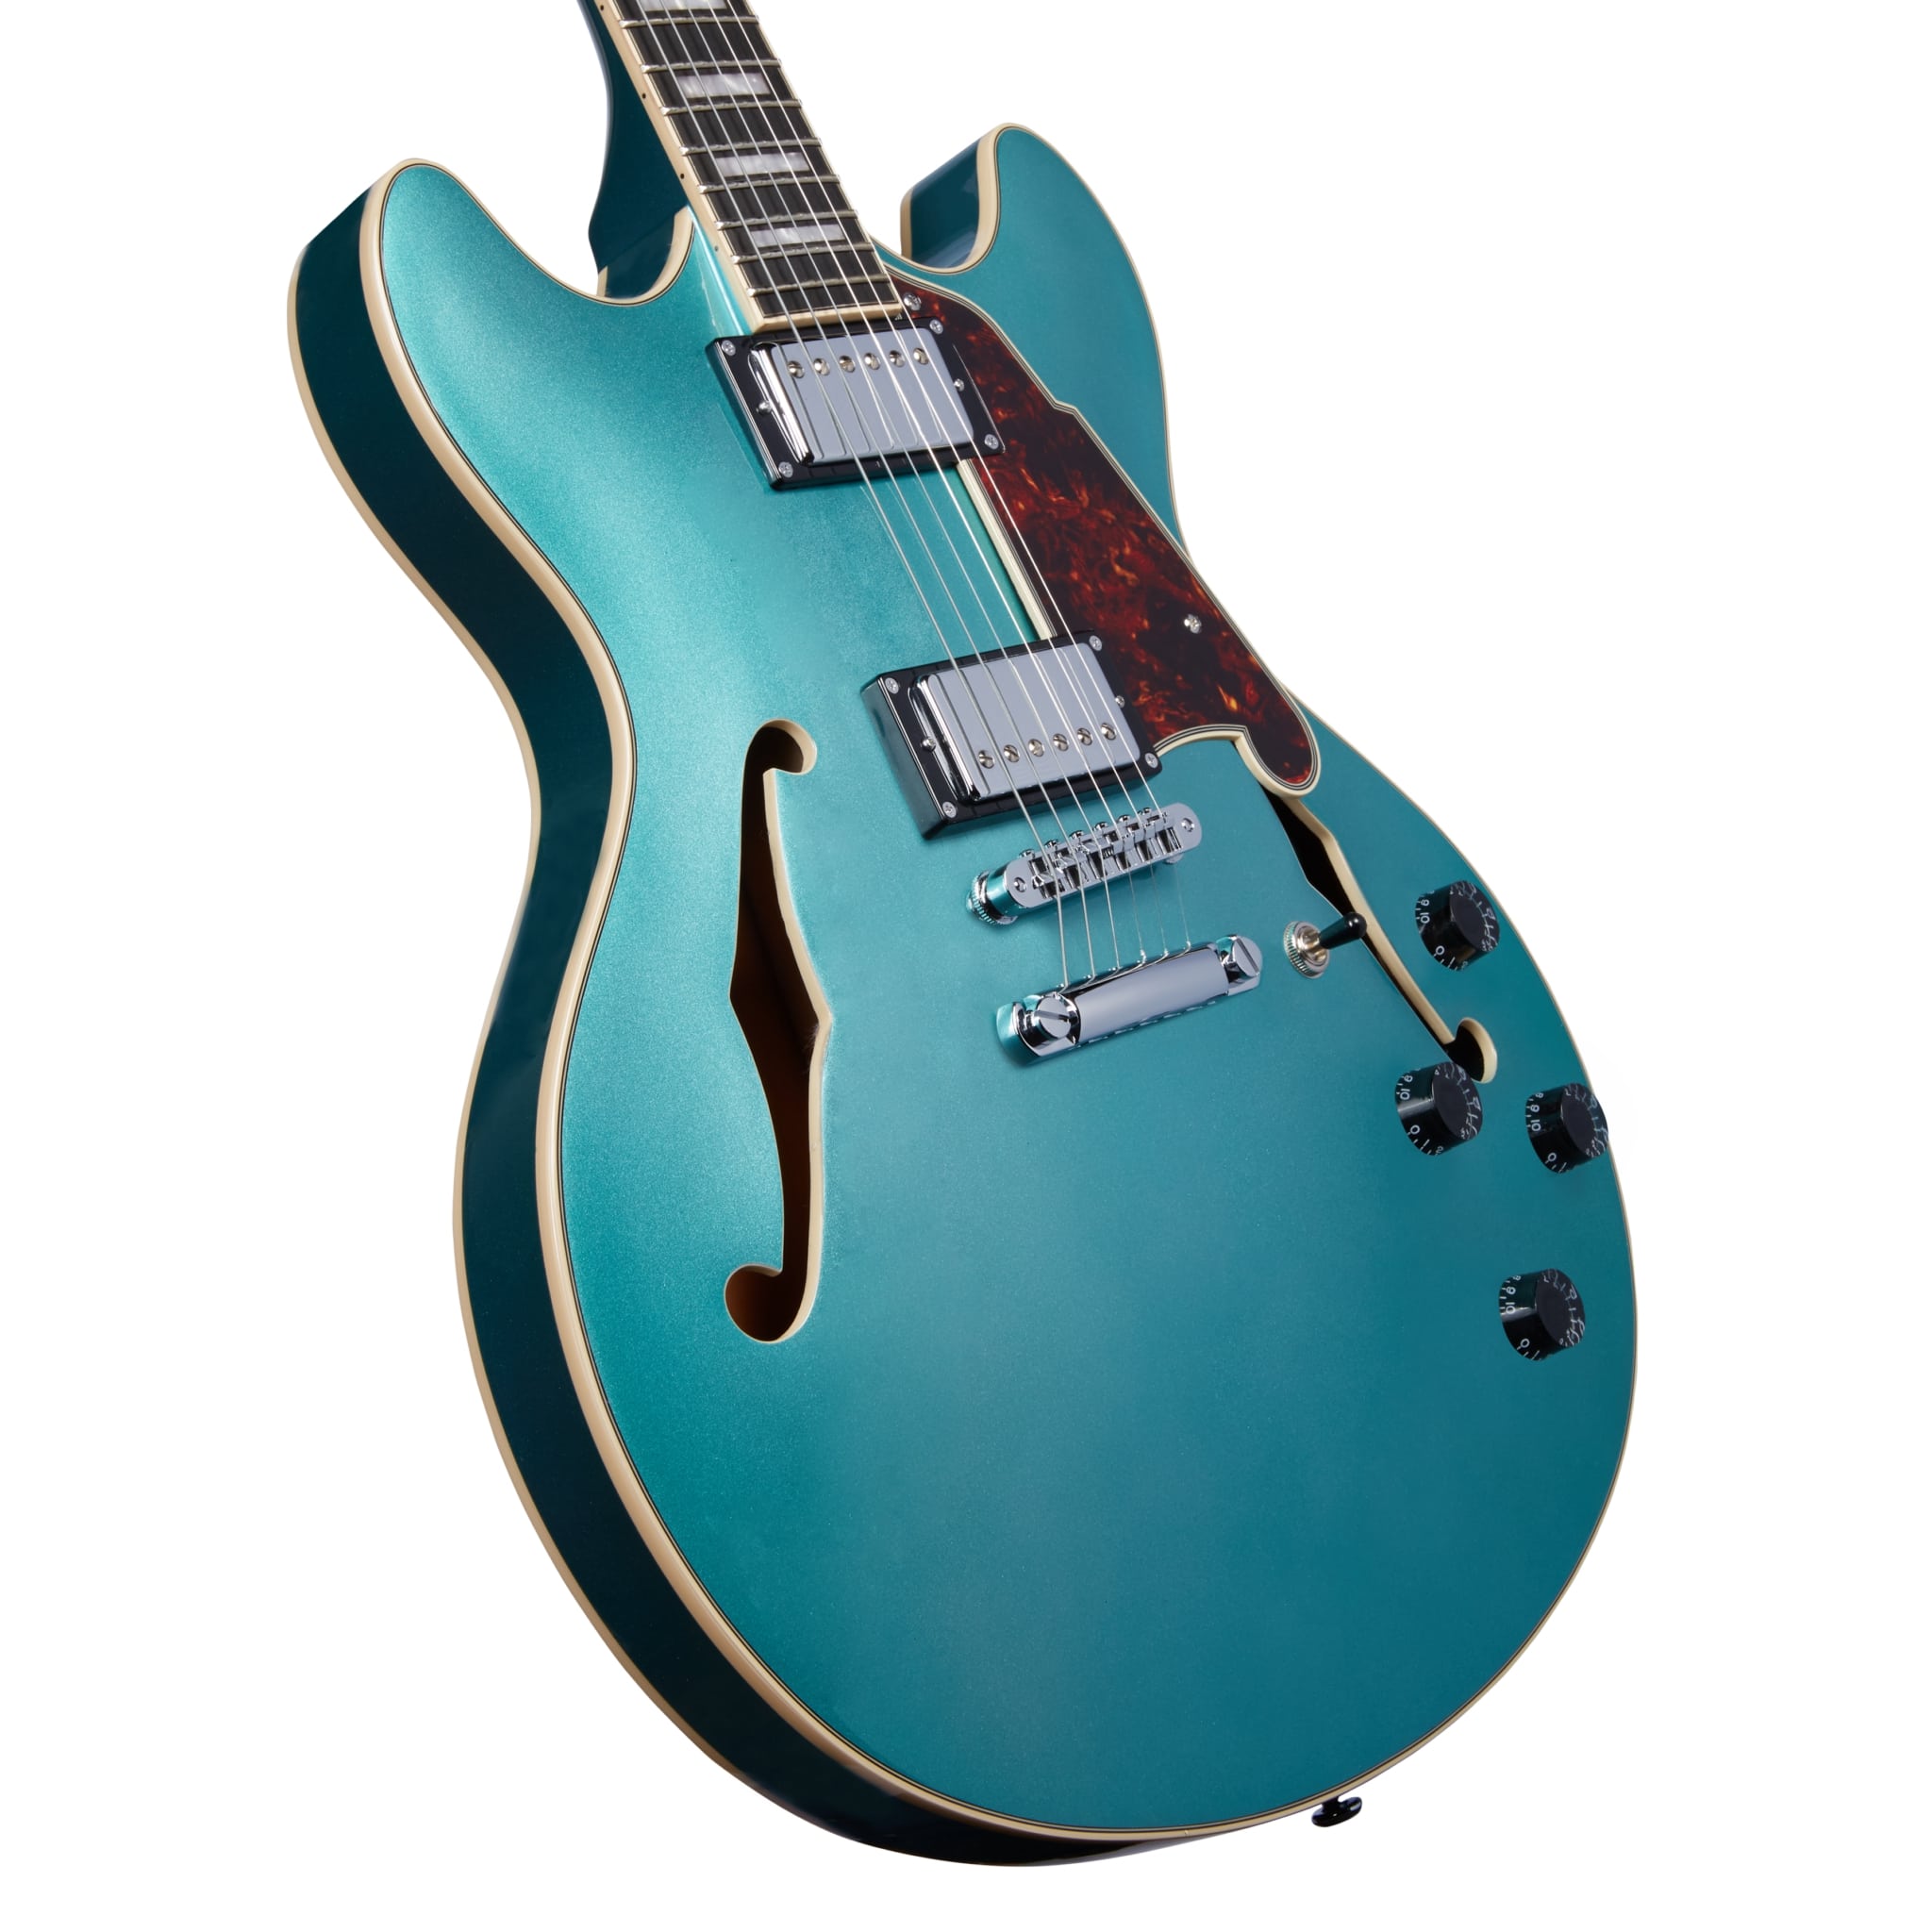 D'Angelico Premier DC Semi-hollow Electric Guitar With Stopbar Tailpiece, Ocean Turquoise DAPDCOTCSCB